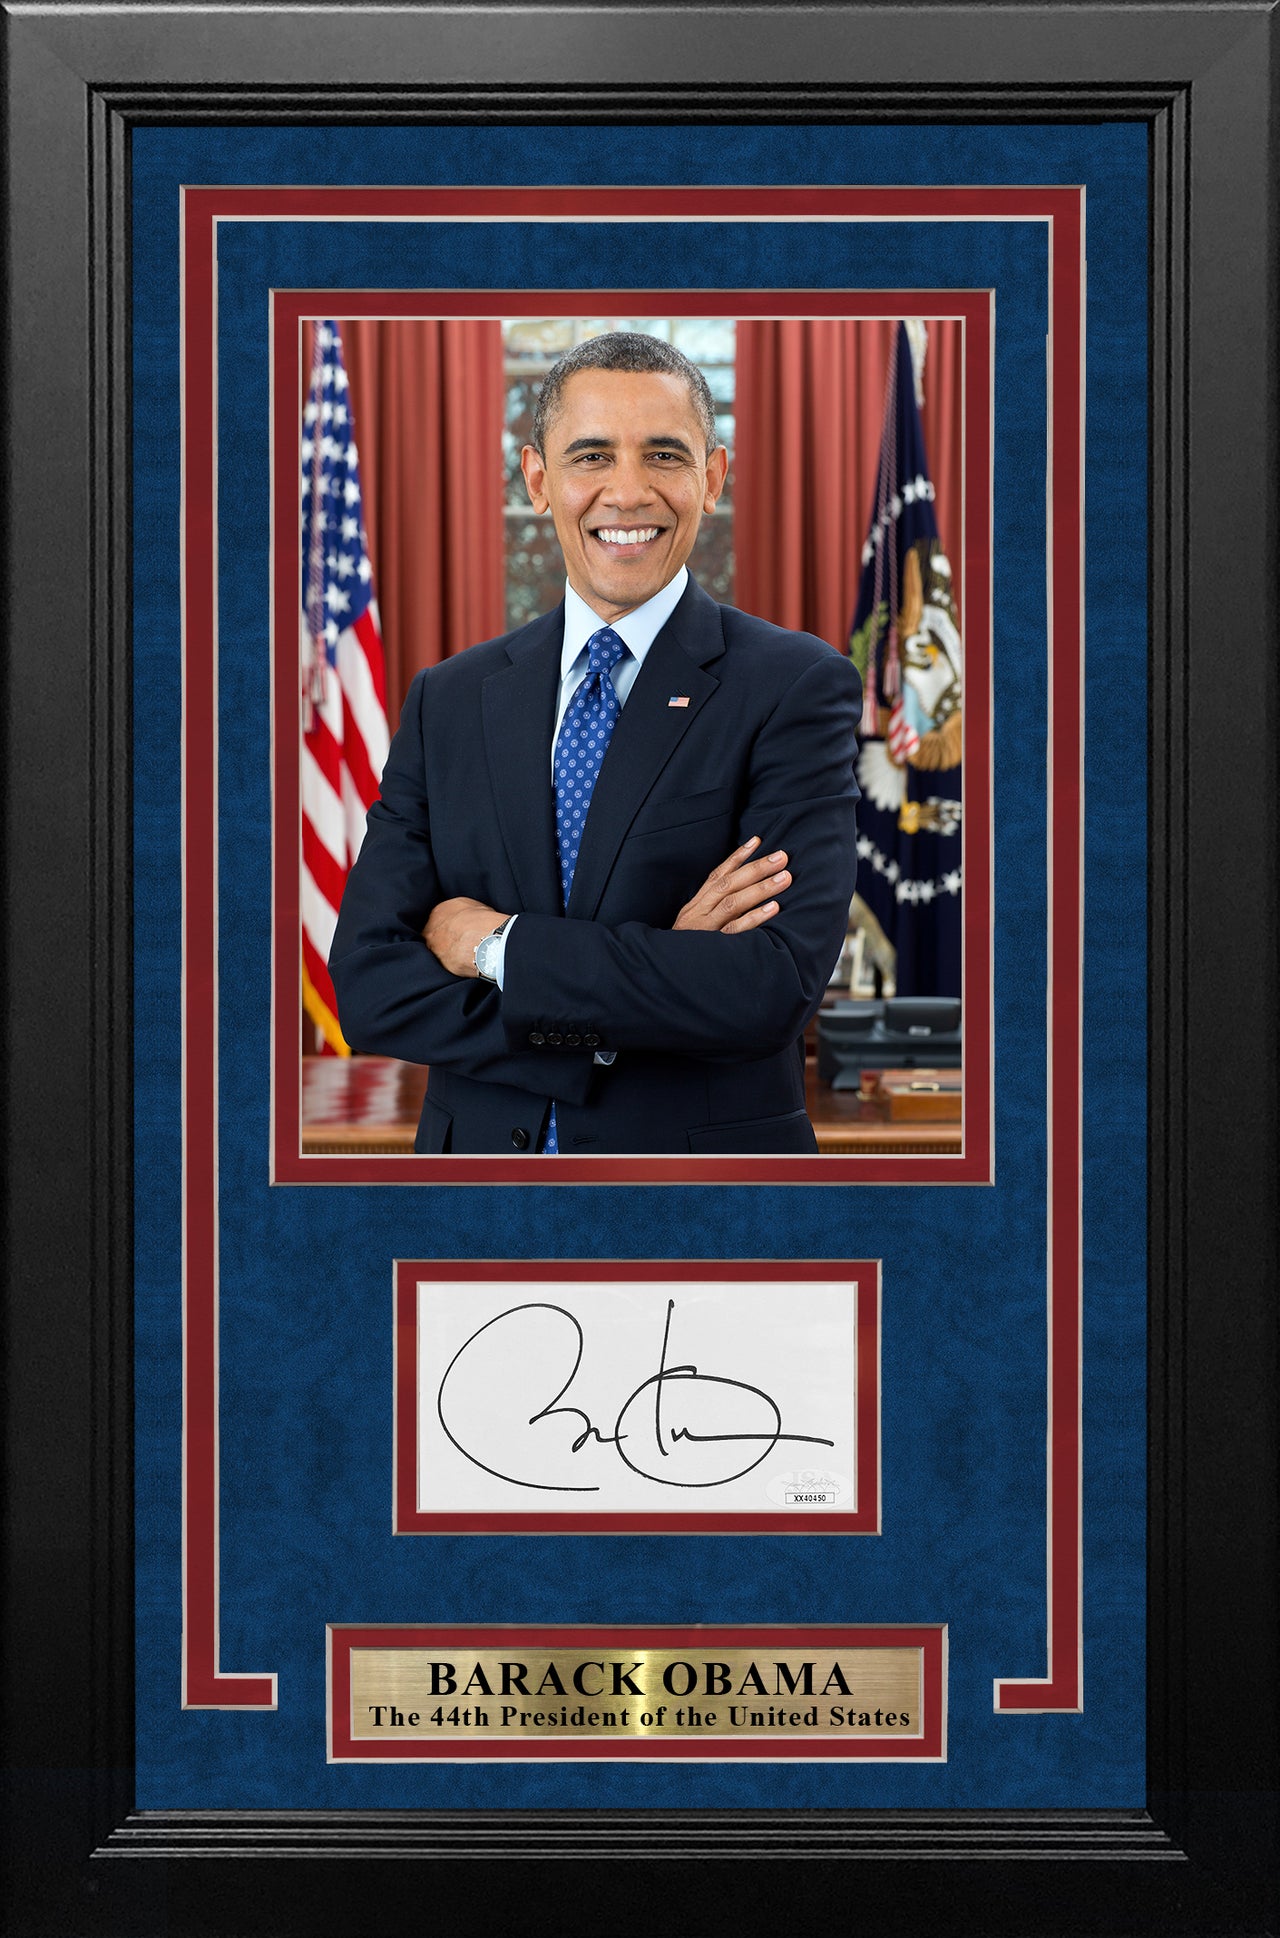 Barack Obama 44th President of the United States Autographed Framed Cut Signature Photo Collage - Dynasty Sports & Framing 